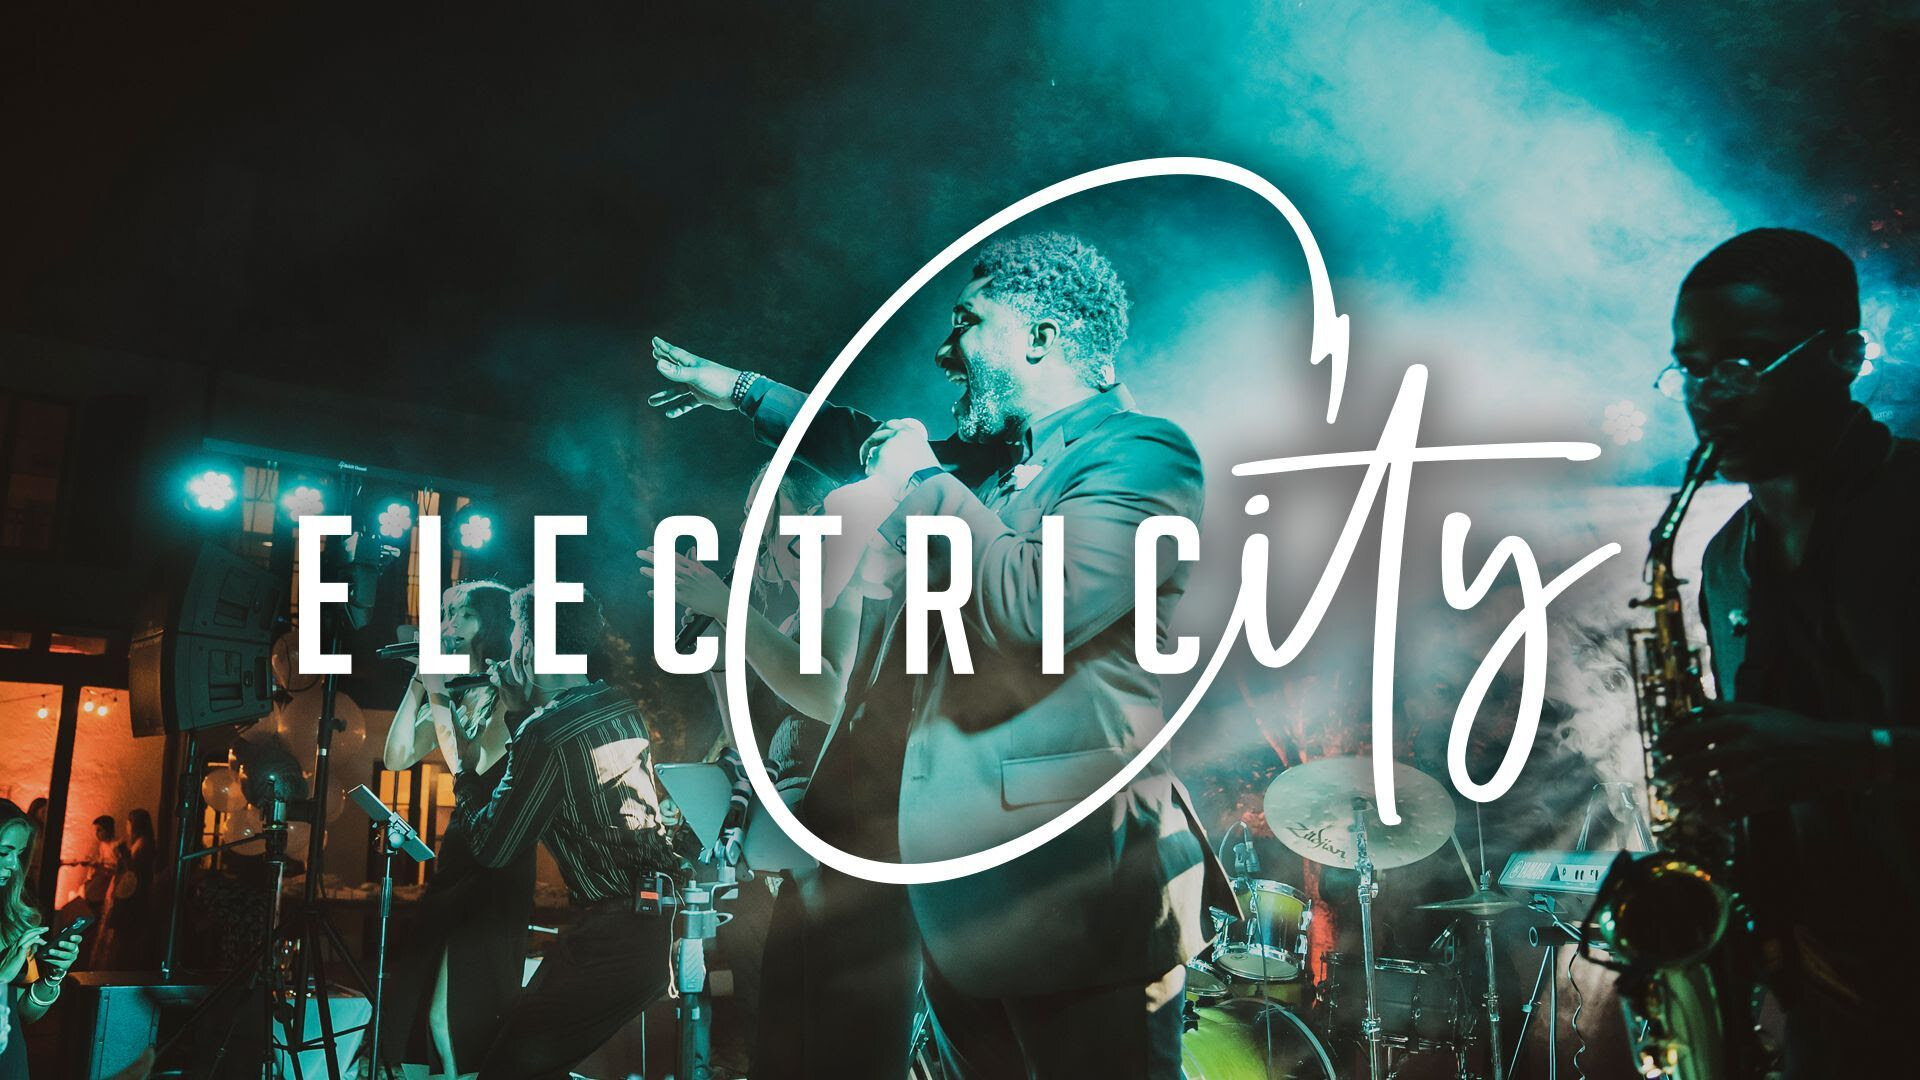 uptown-entertainment-electric-city-band.jpg